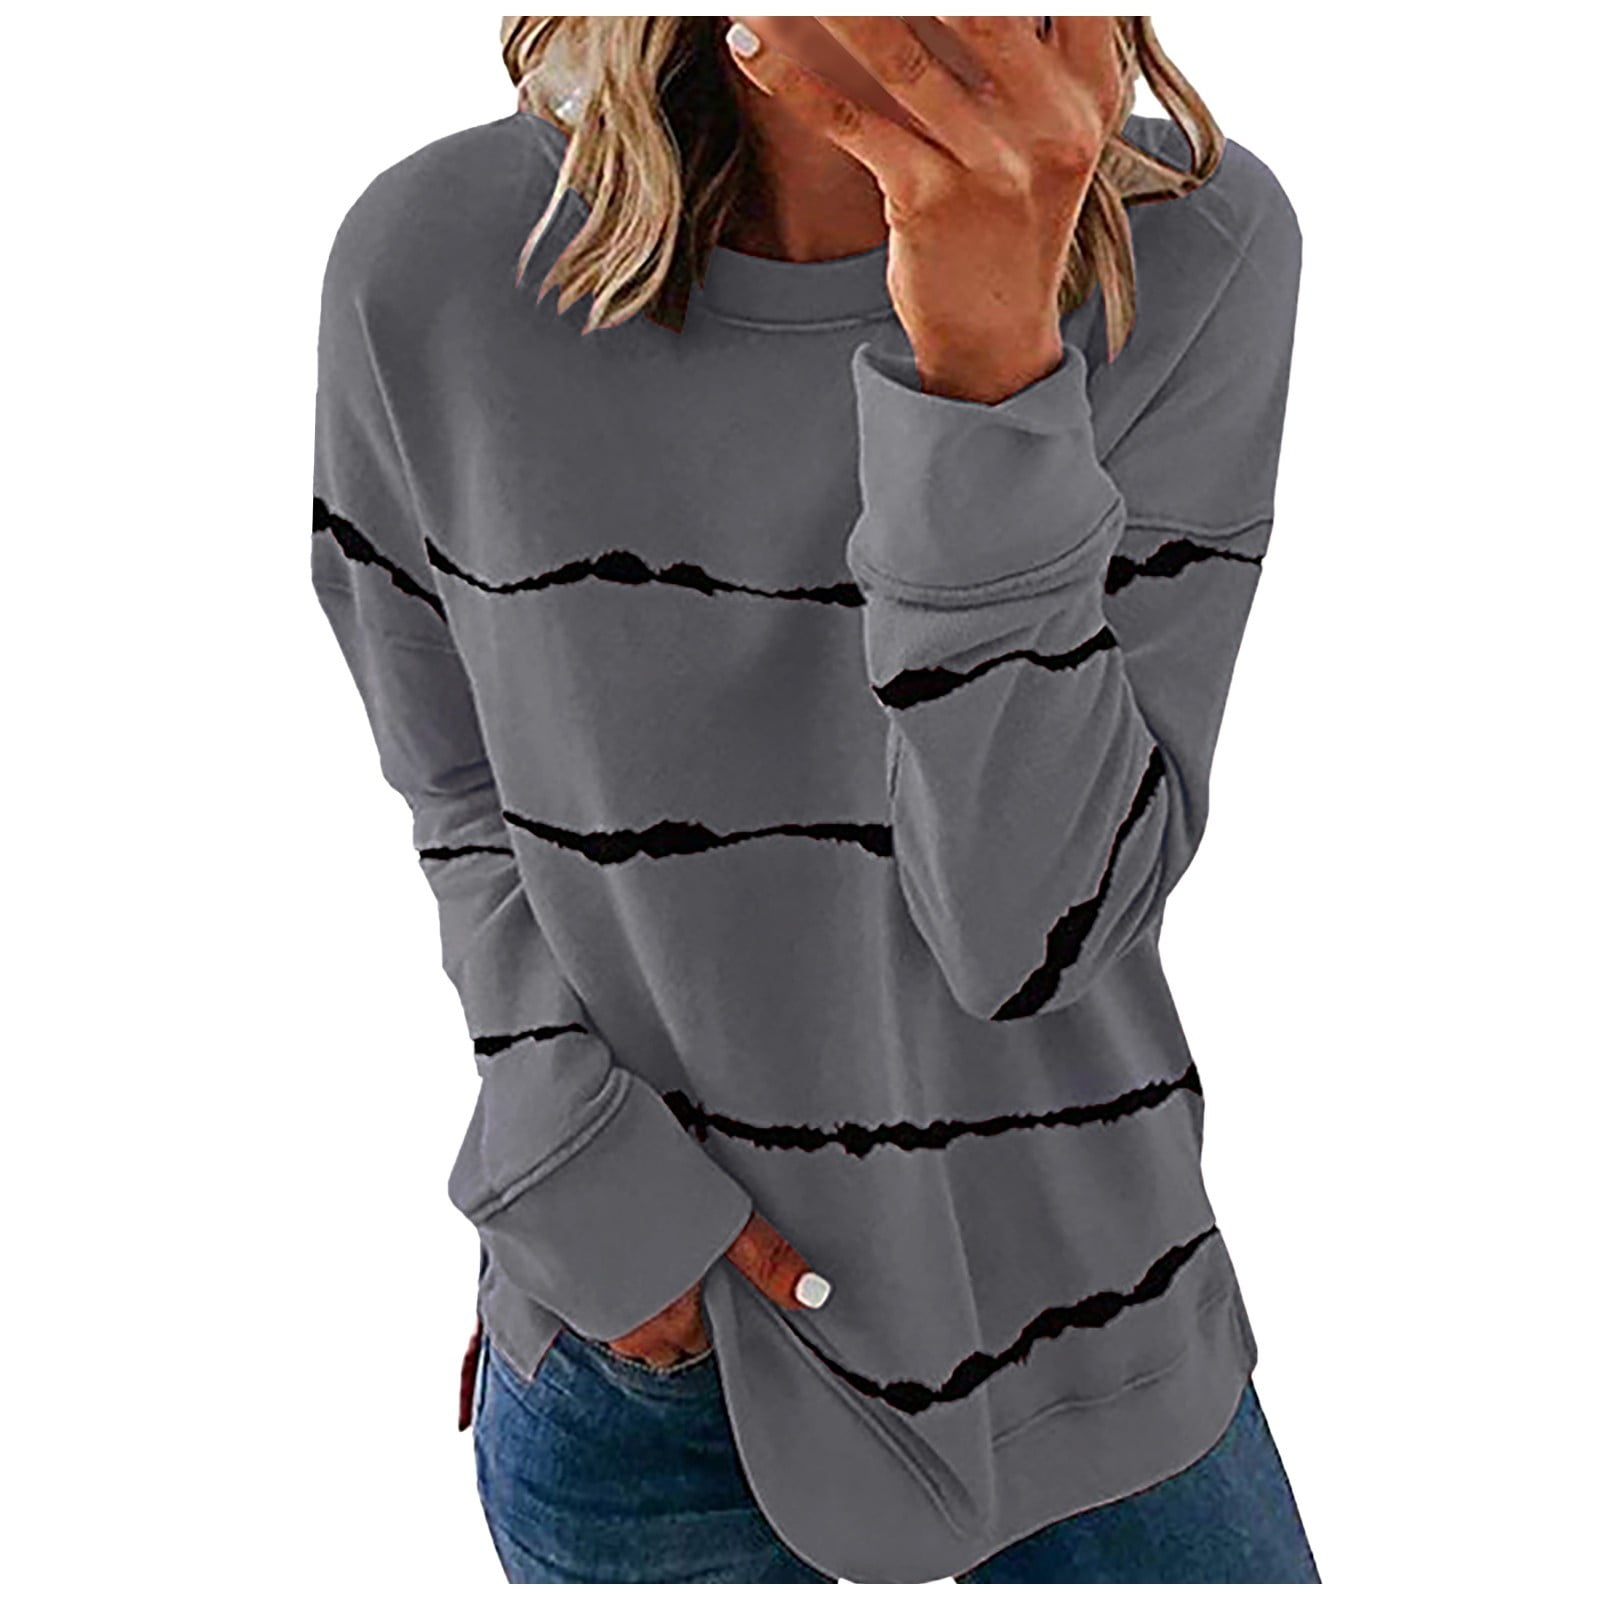 Black Fashion Friday Deals Women's Sweatshirts Today Deals Prime Grey  Sweatshirt Lighten Deals of the Day Solid Stylish Loose Fit Casual Pullover